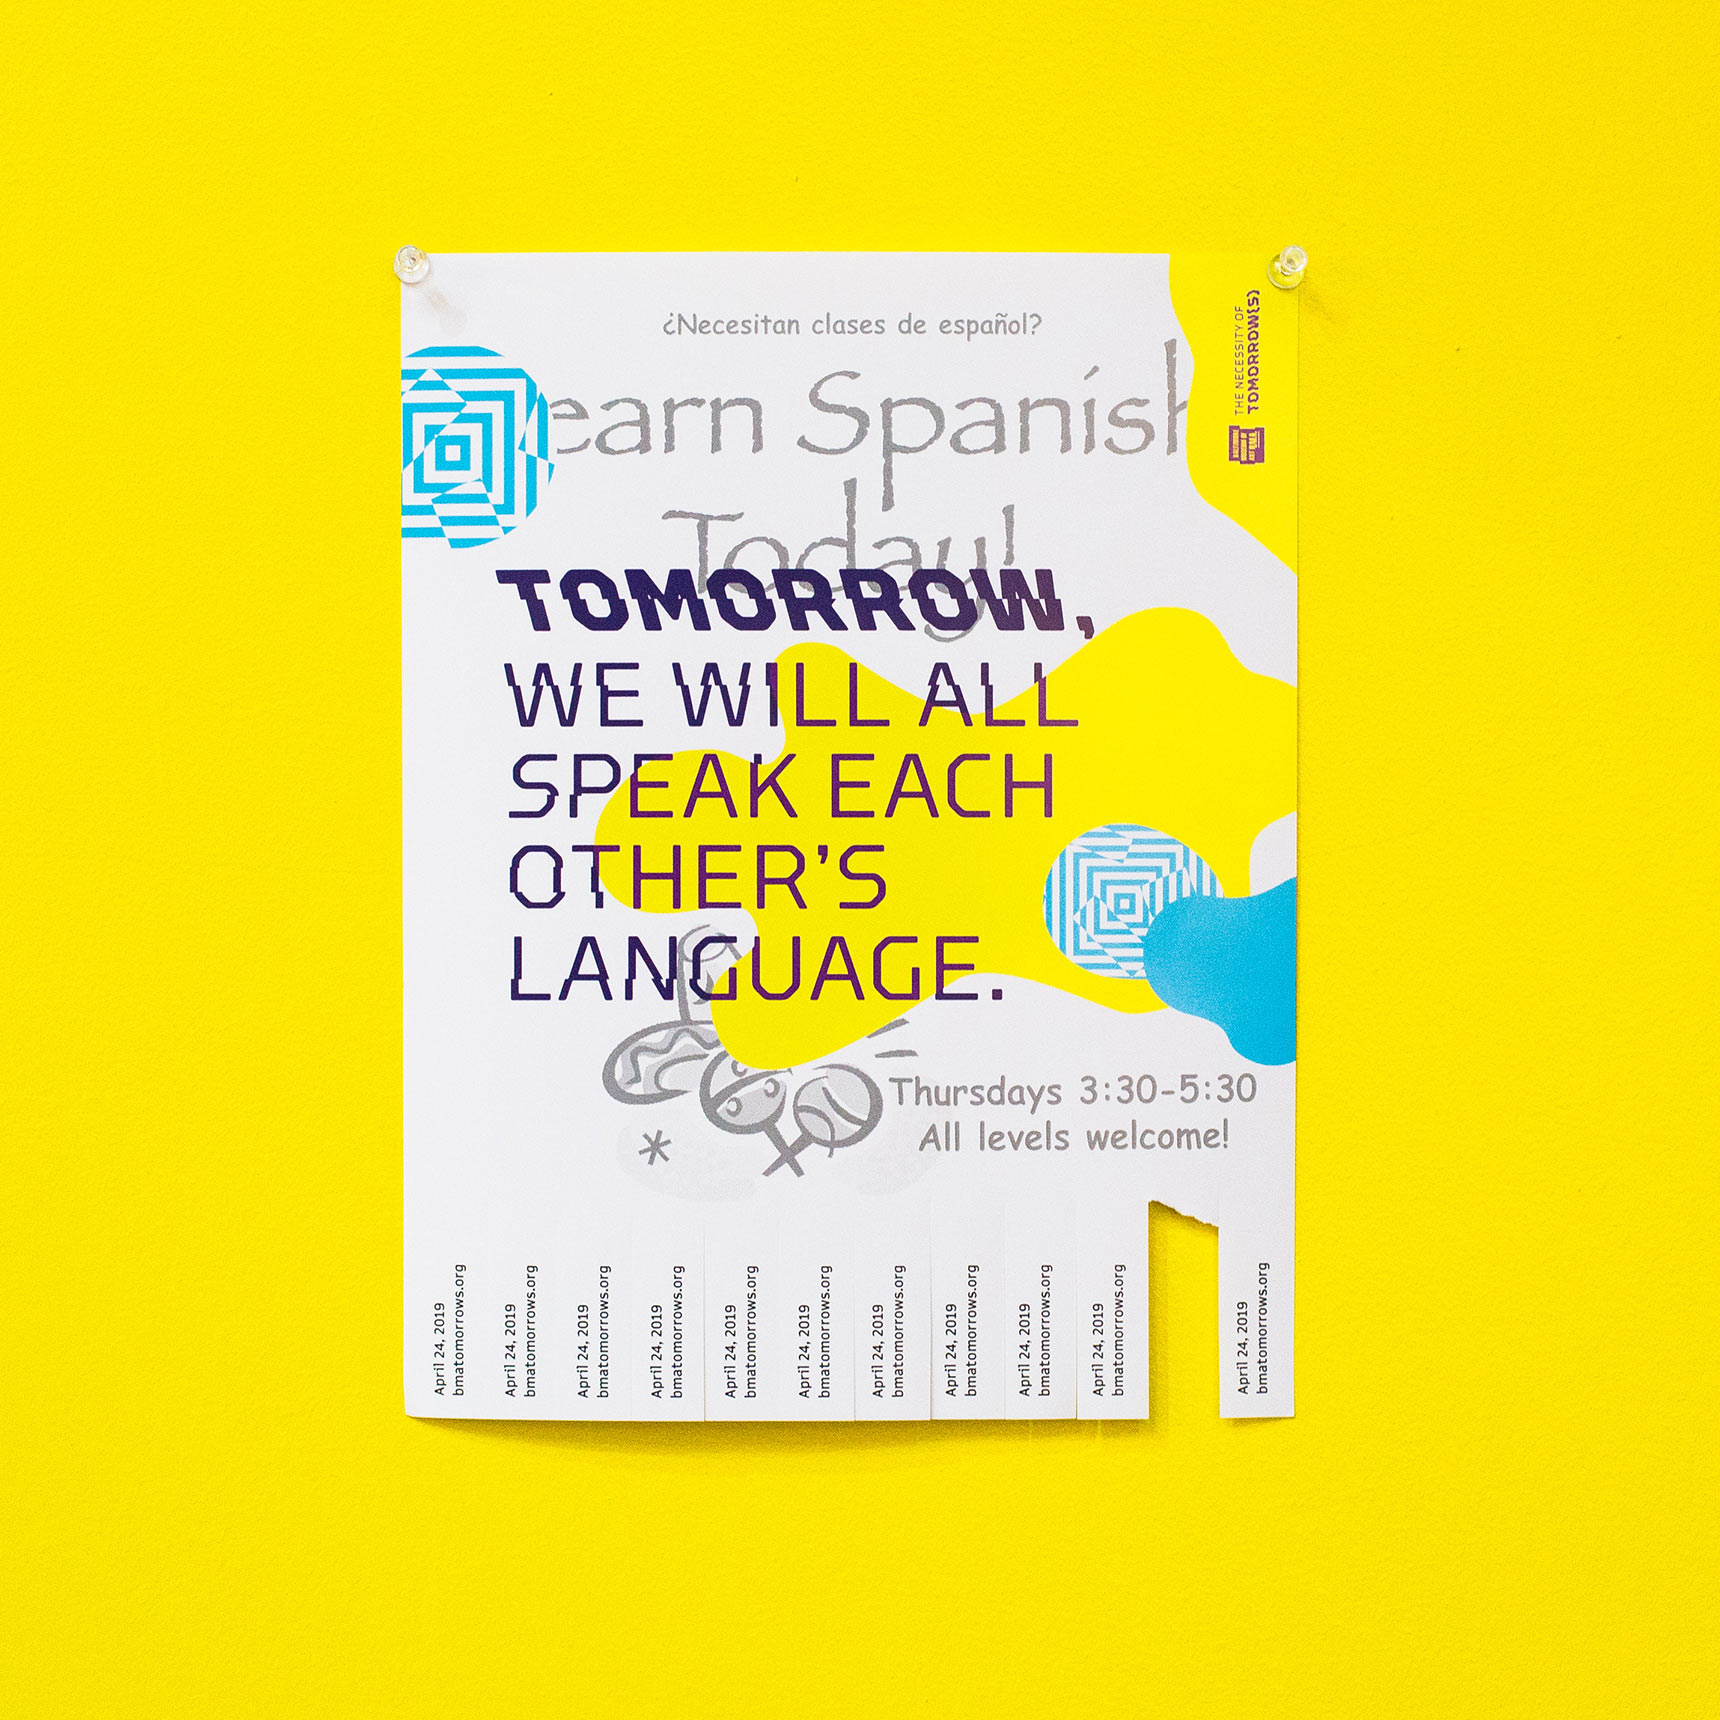 Tomorrow, we will all speak each other's language. An interrupted flyer public art detournement